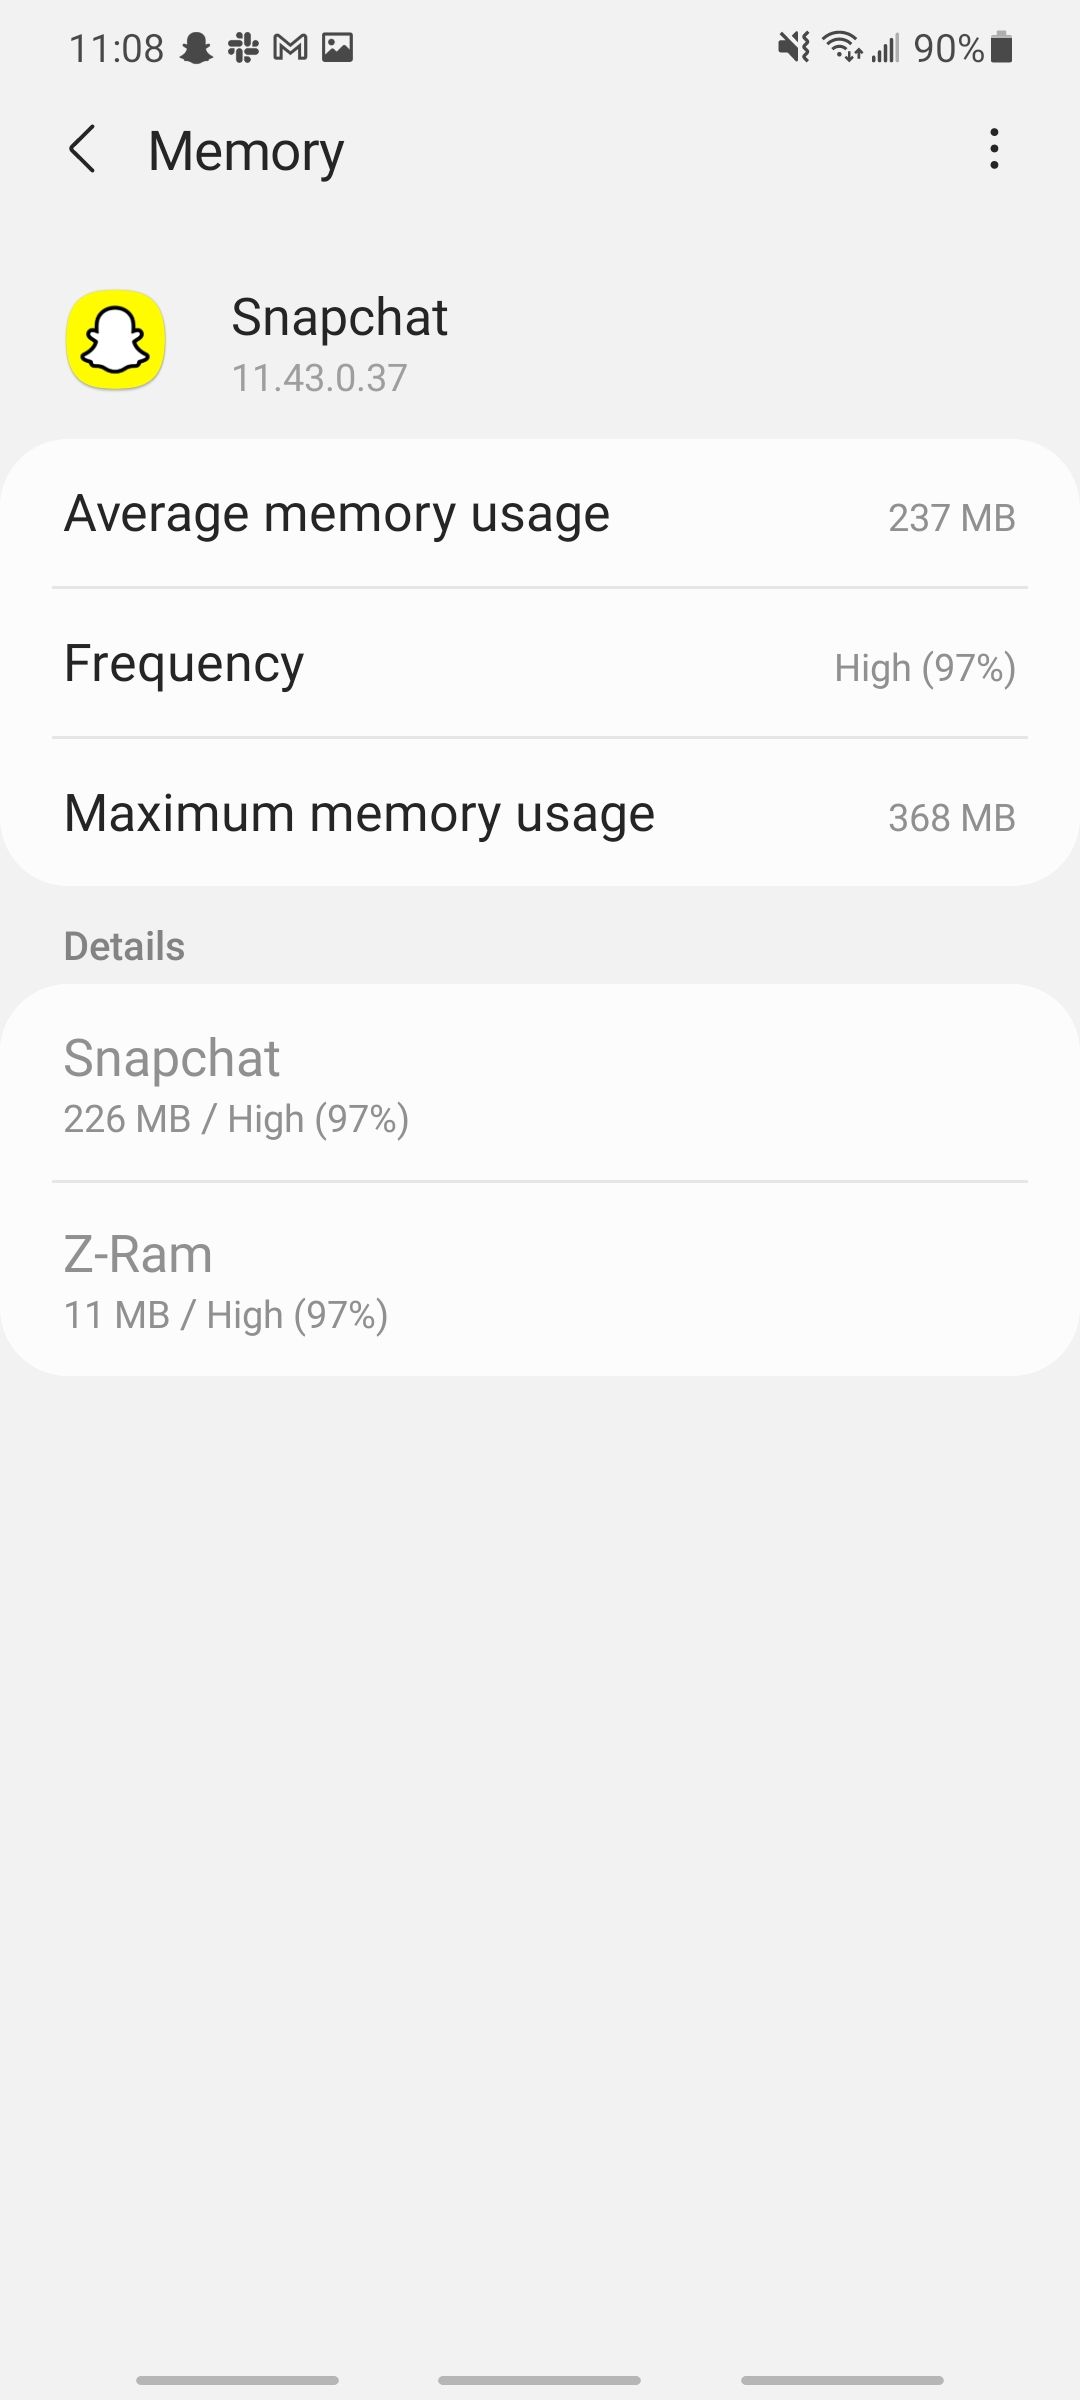 application memory usage from snapchat app